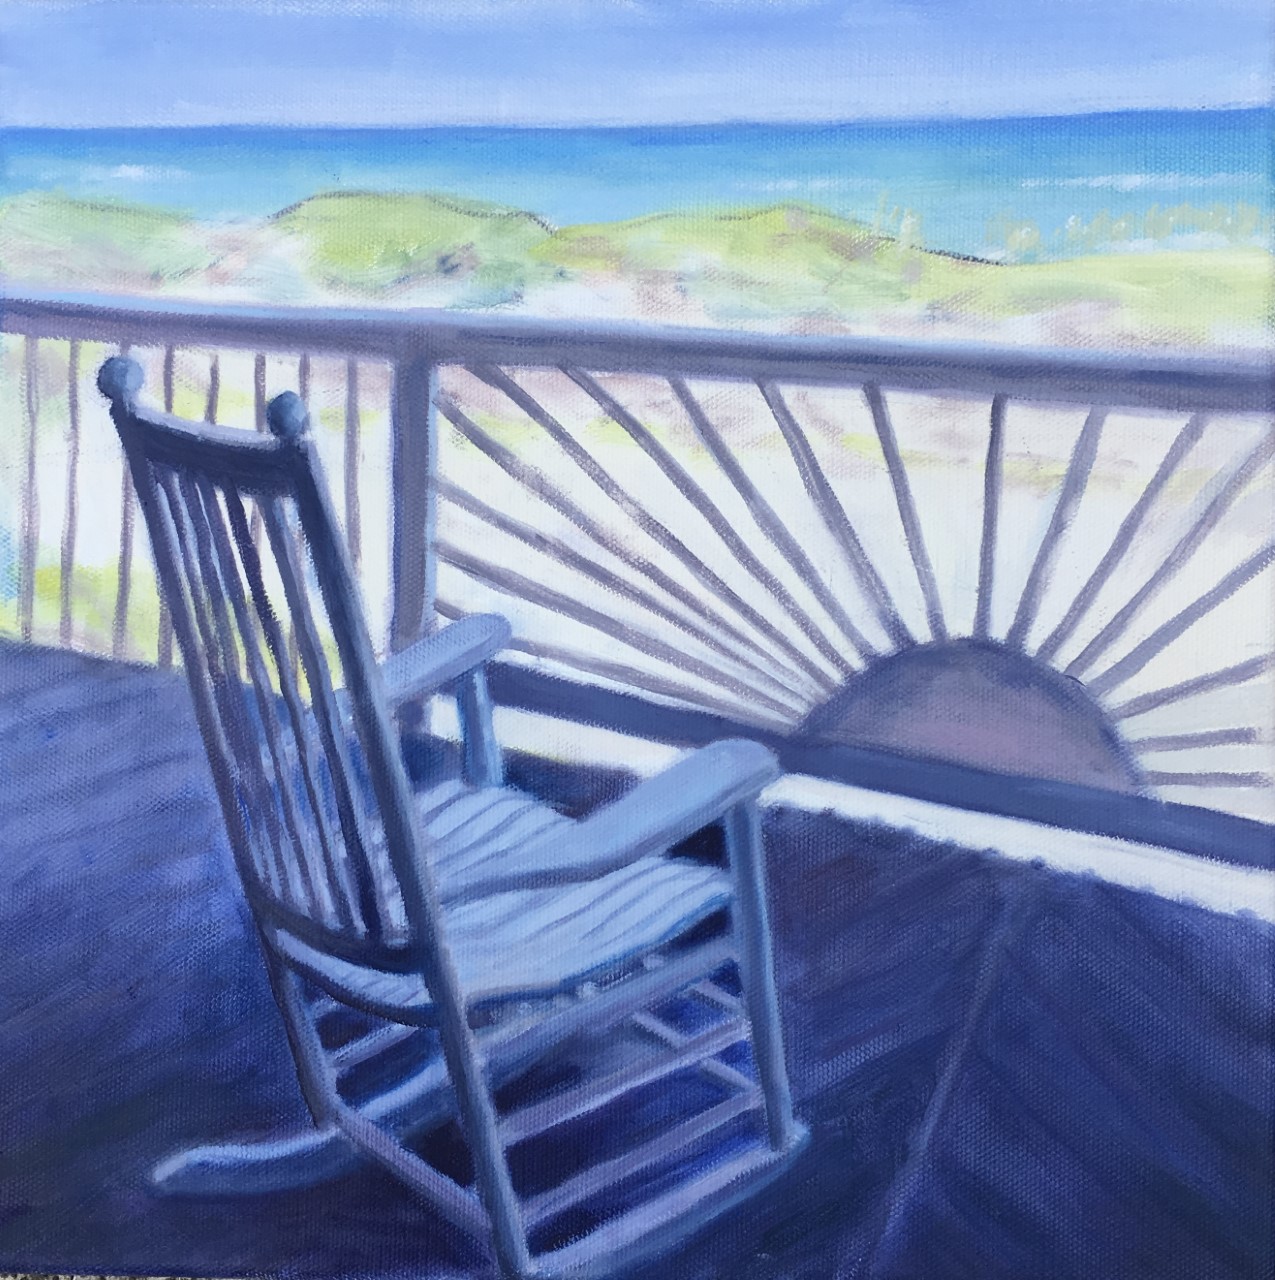 Best Seat In The House
Oil
Donna Donlin
13 1/2 in x 13 1/2 in